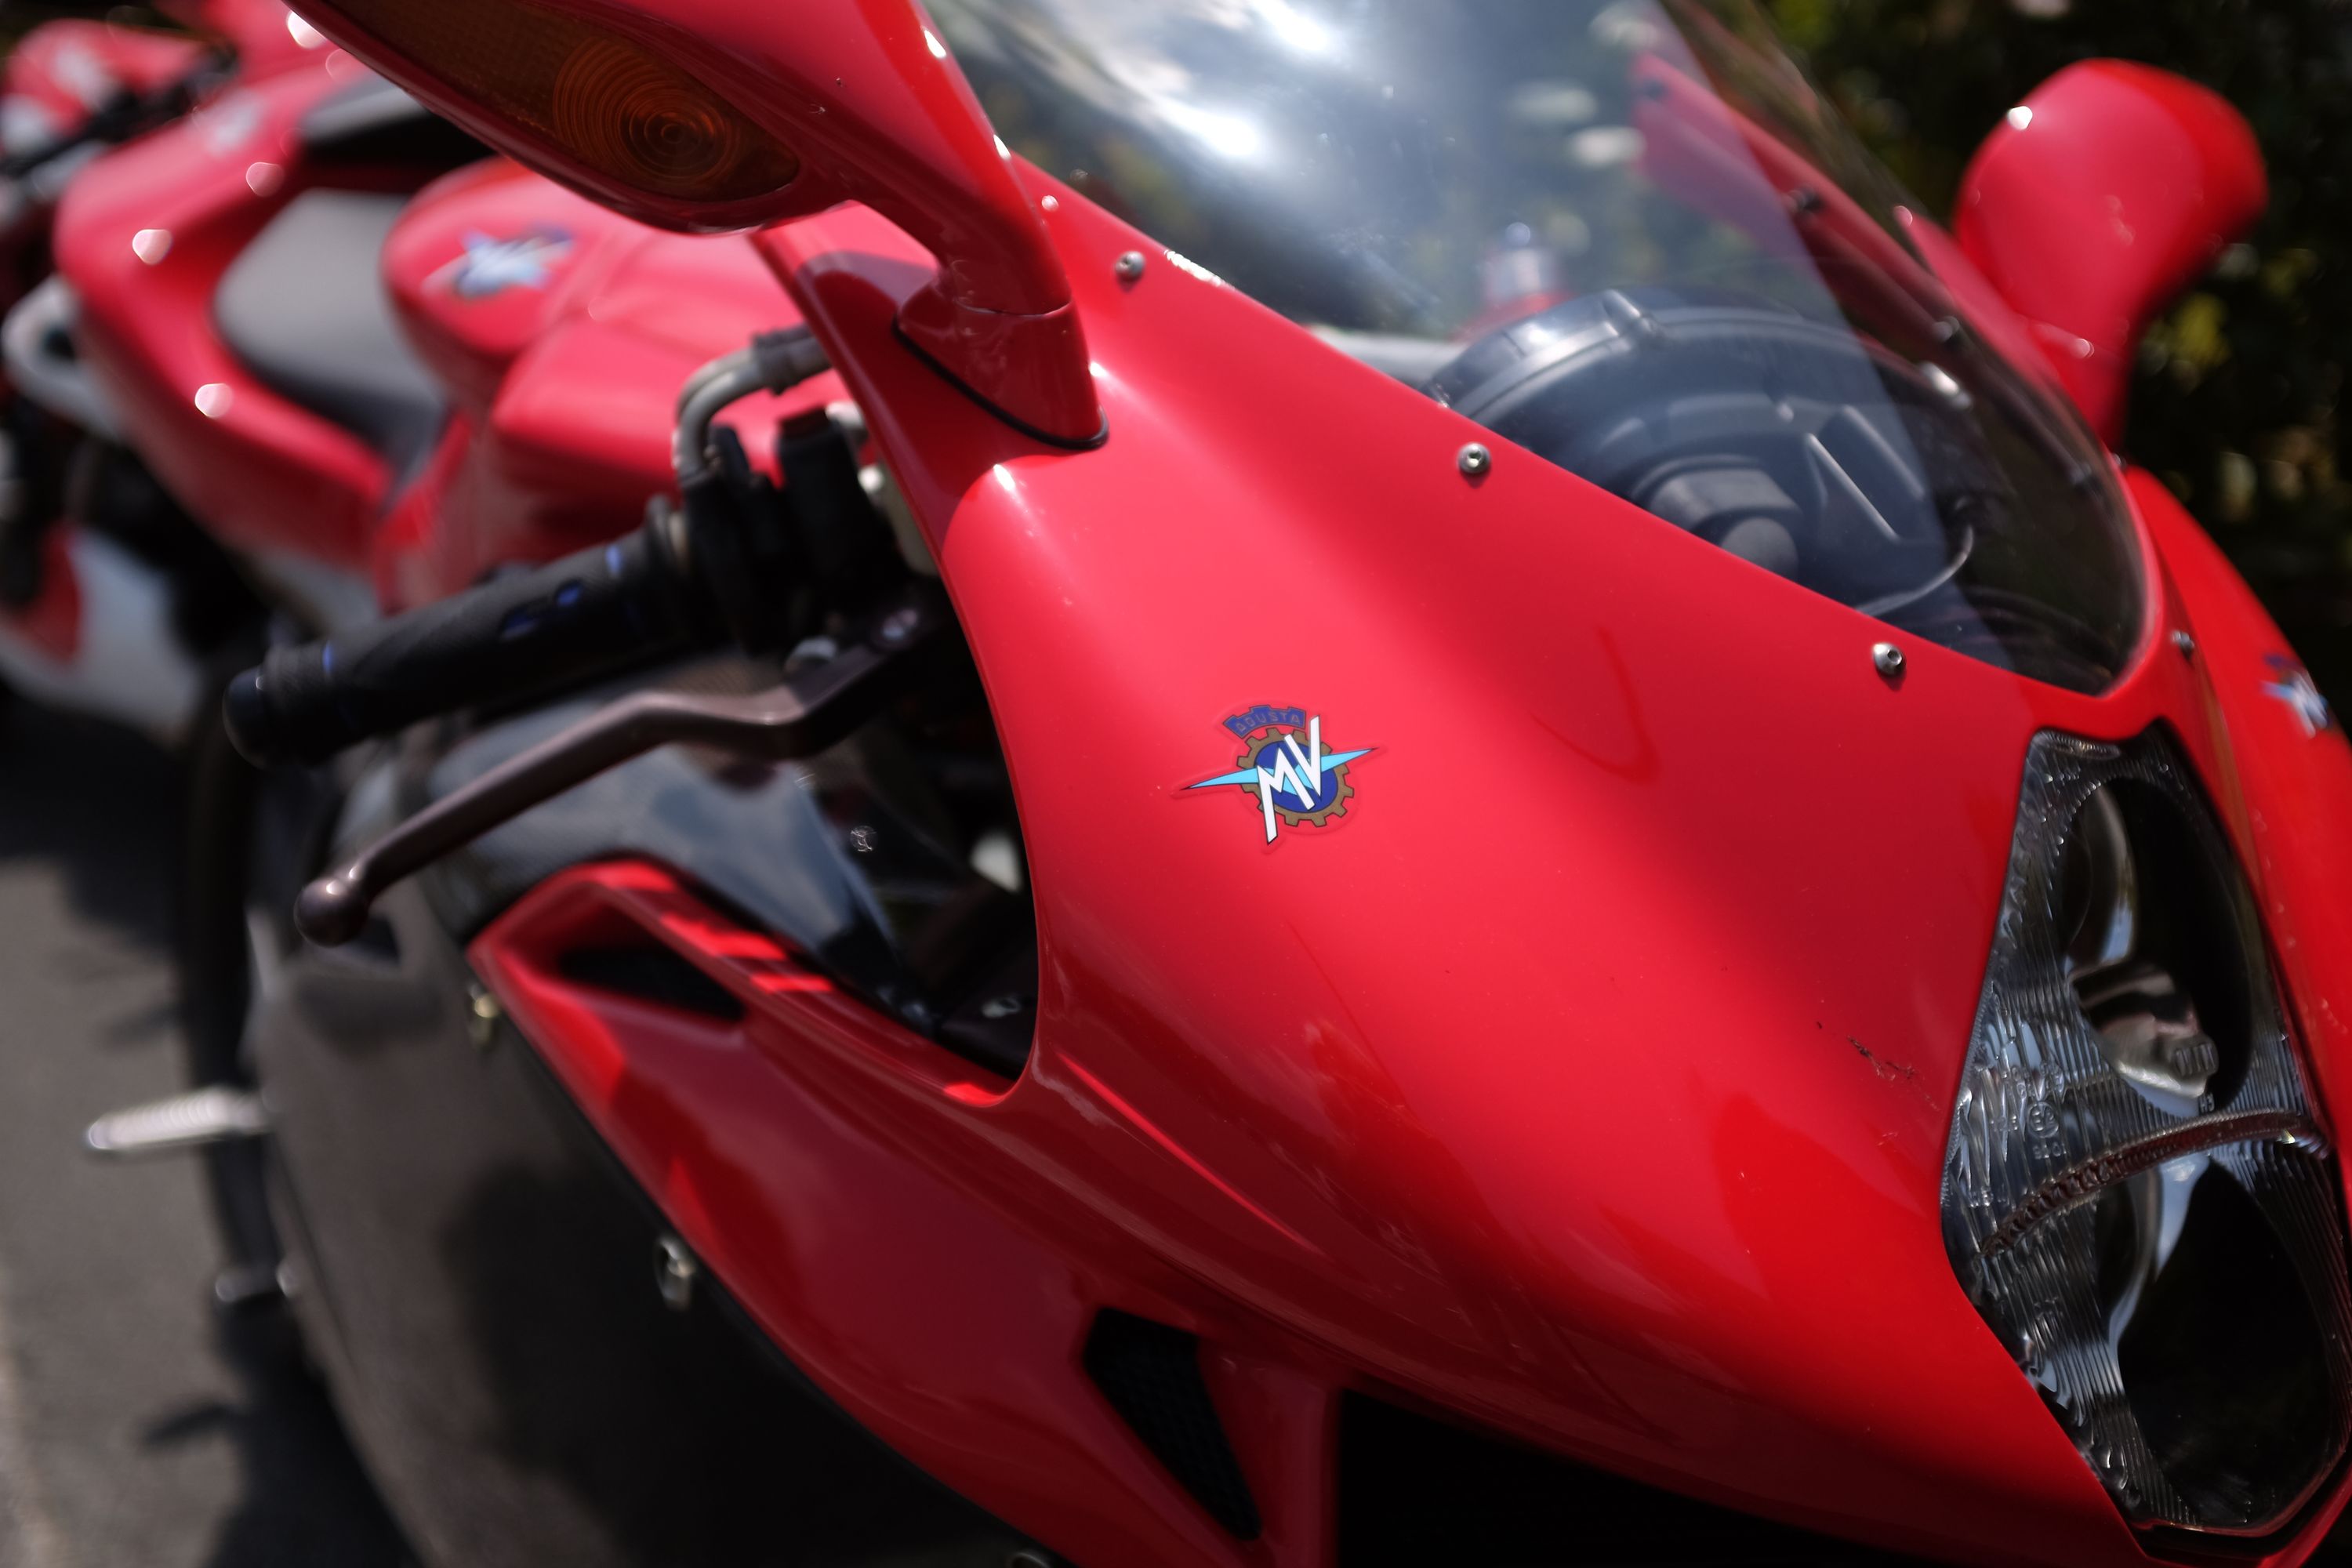 Looking up close at the windscreen and headlight of a red MV Agusta F4, a very fast Italian sports bike.